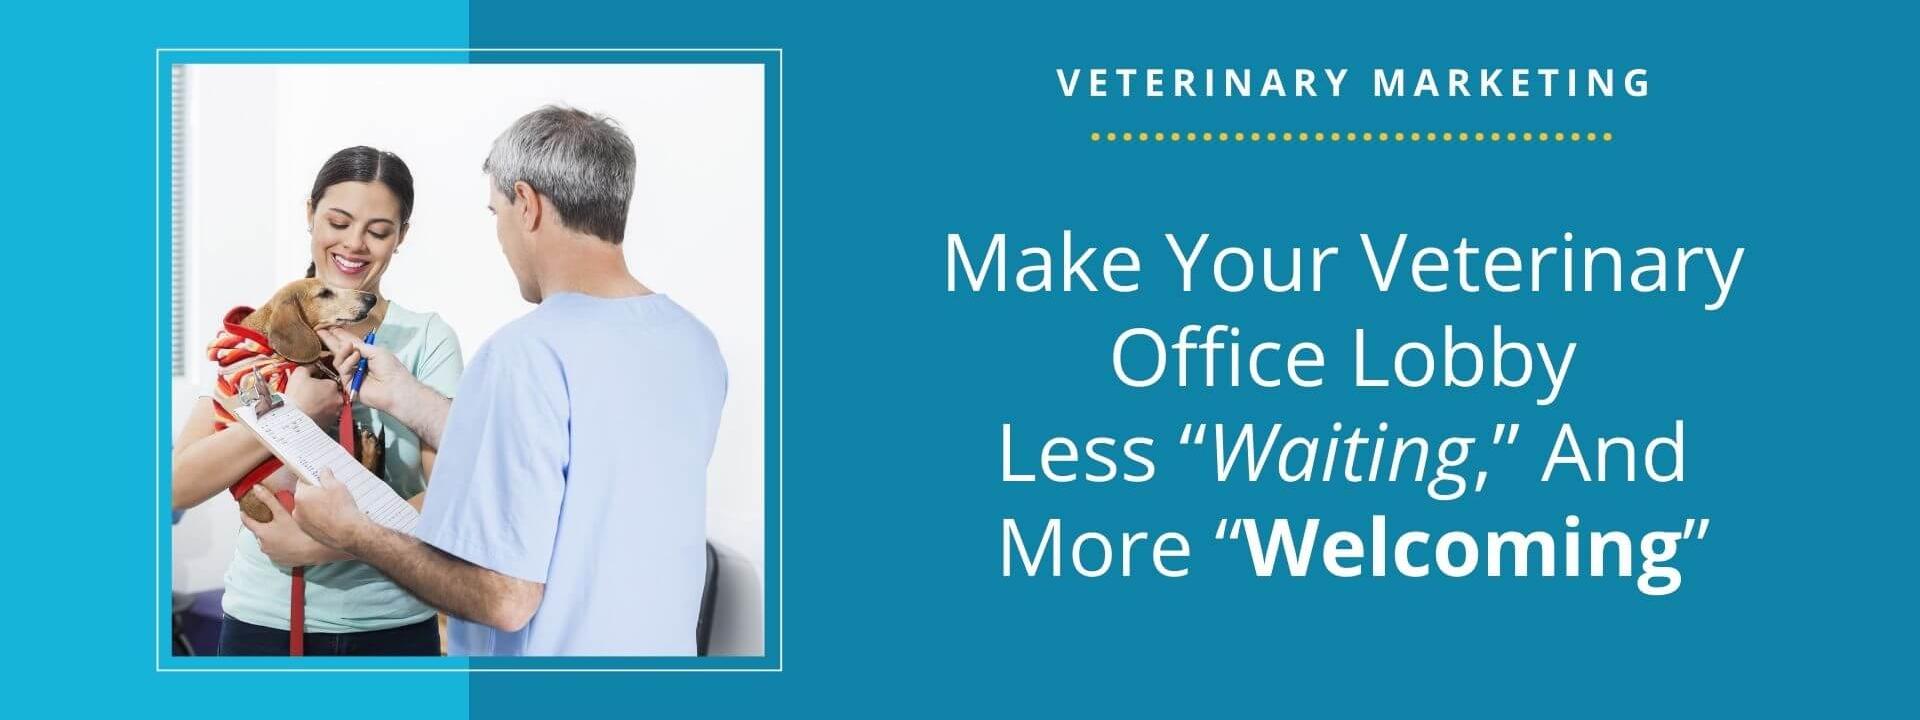 Make Your Veterinary Office Lobby Less “Waiting,” And More “Welcoming”